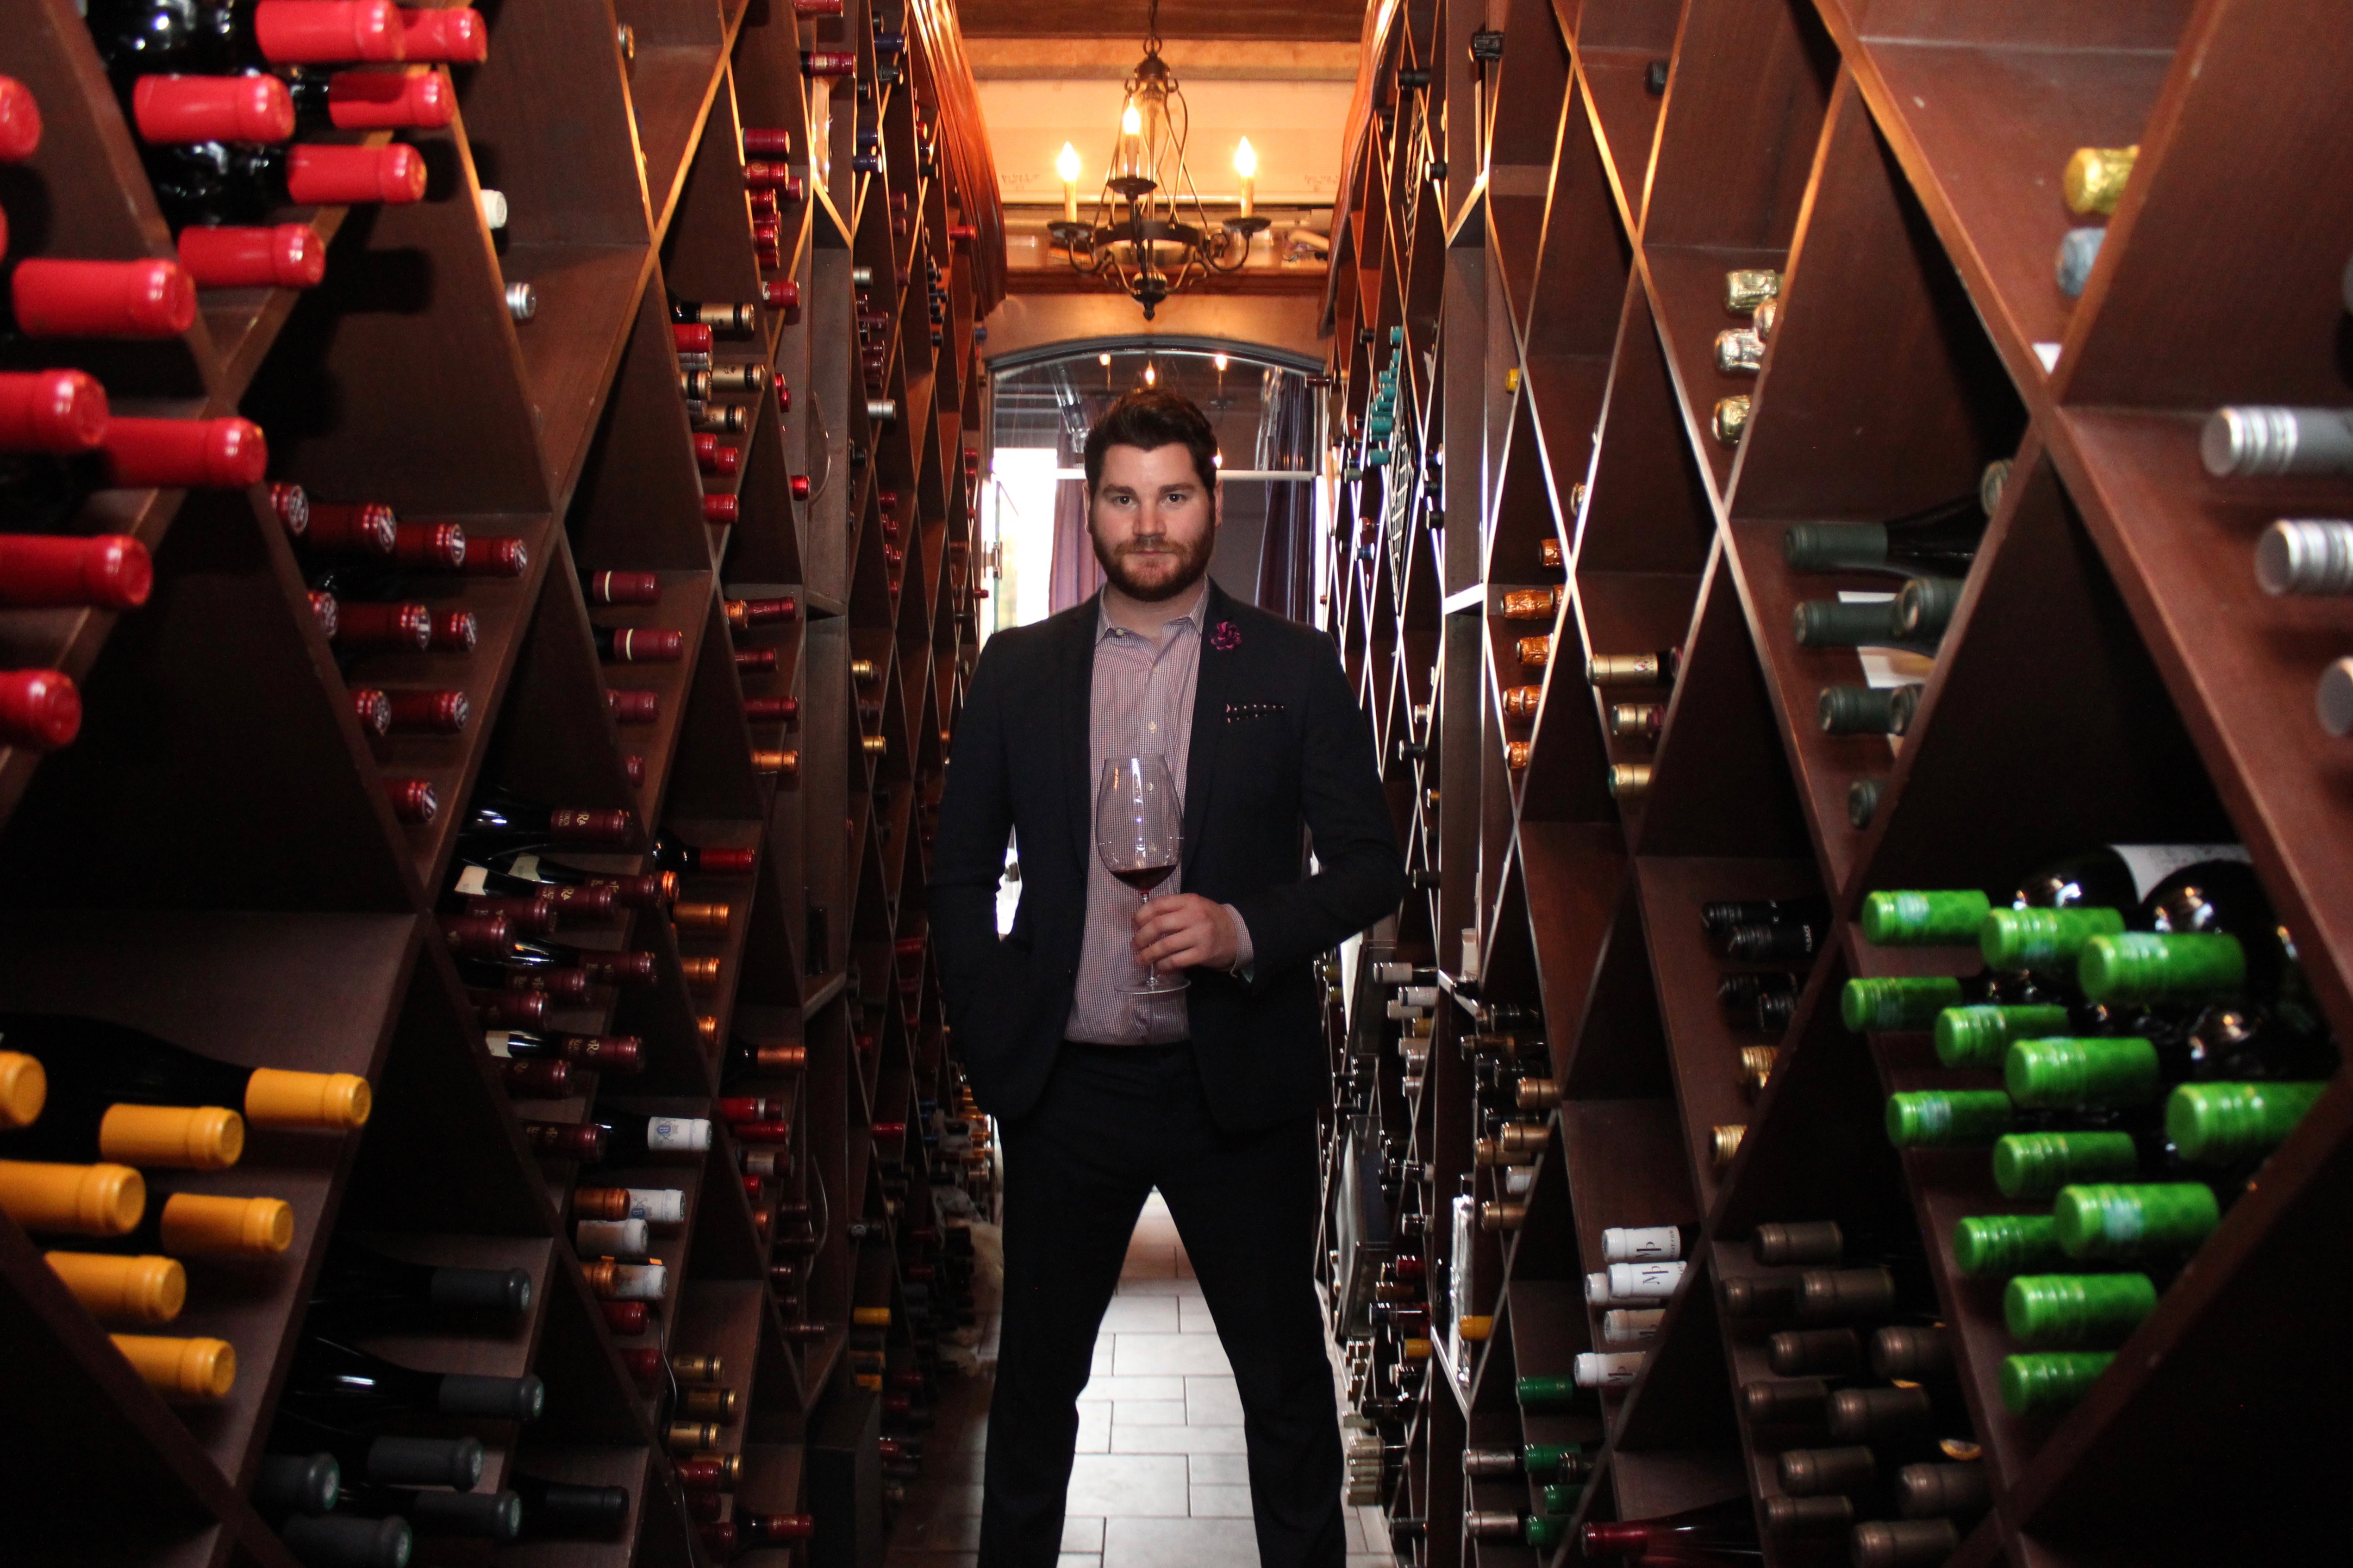 Alexander Carlin, wine director at EDWINS Leadership & Restaurant Institute, has many options from which to choose at the Cleveland restaurant.